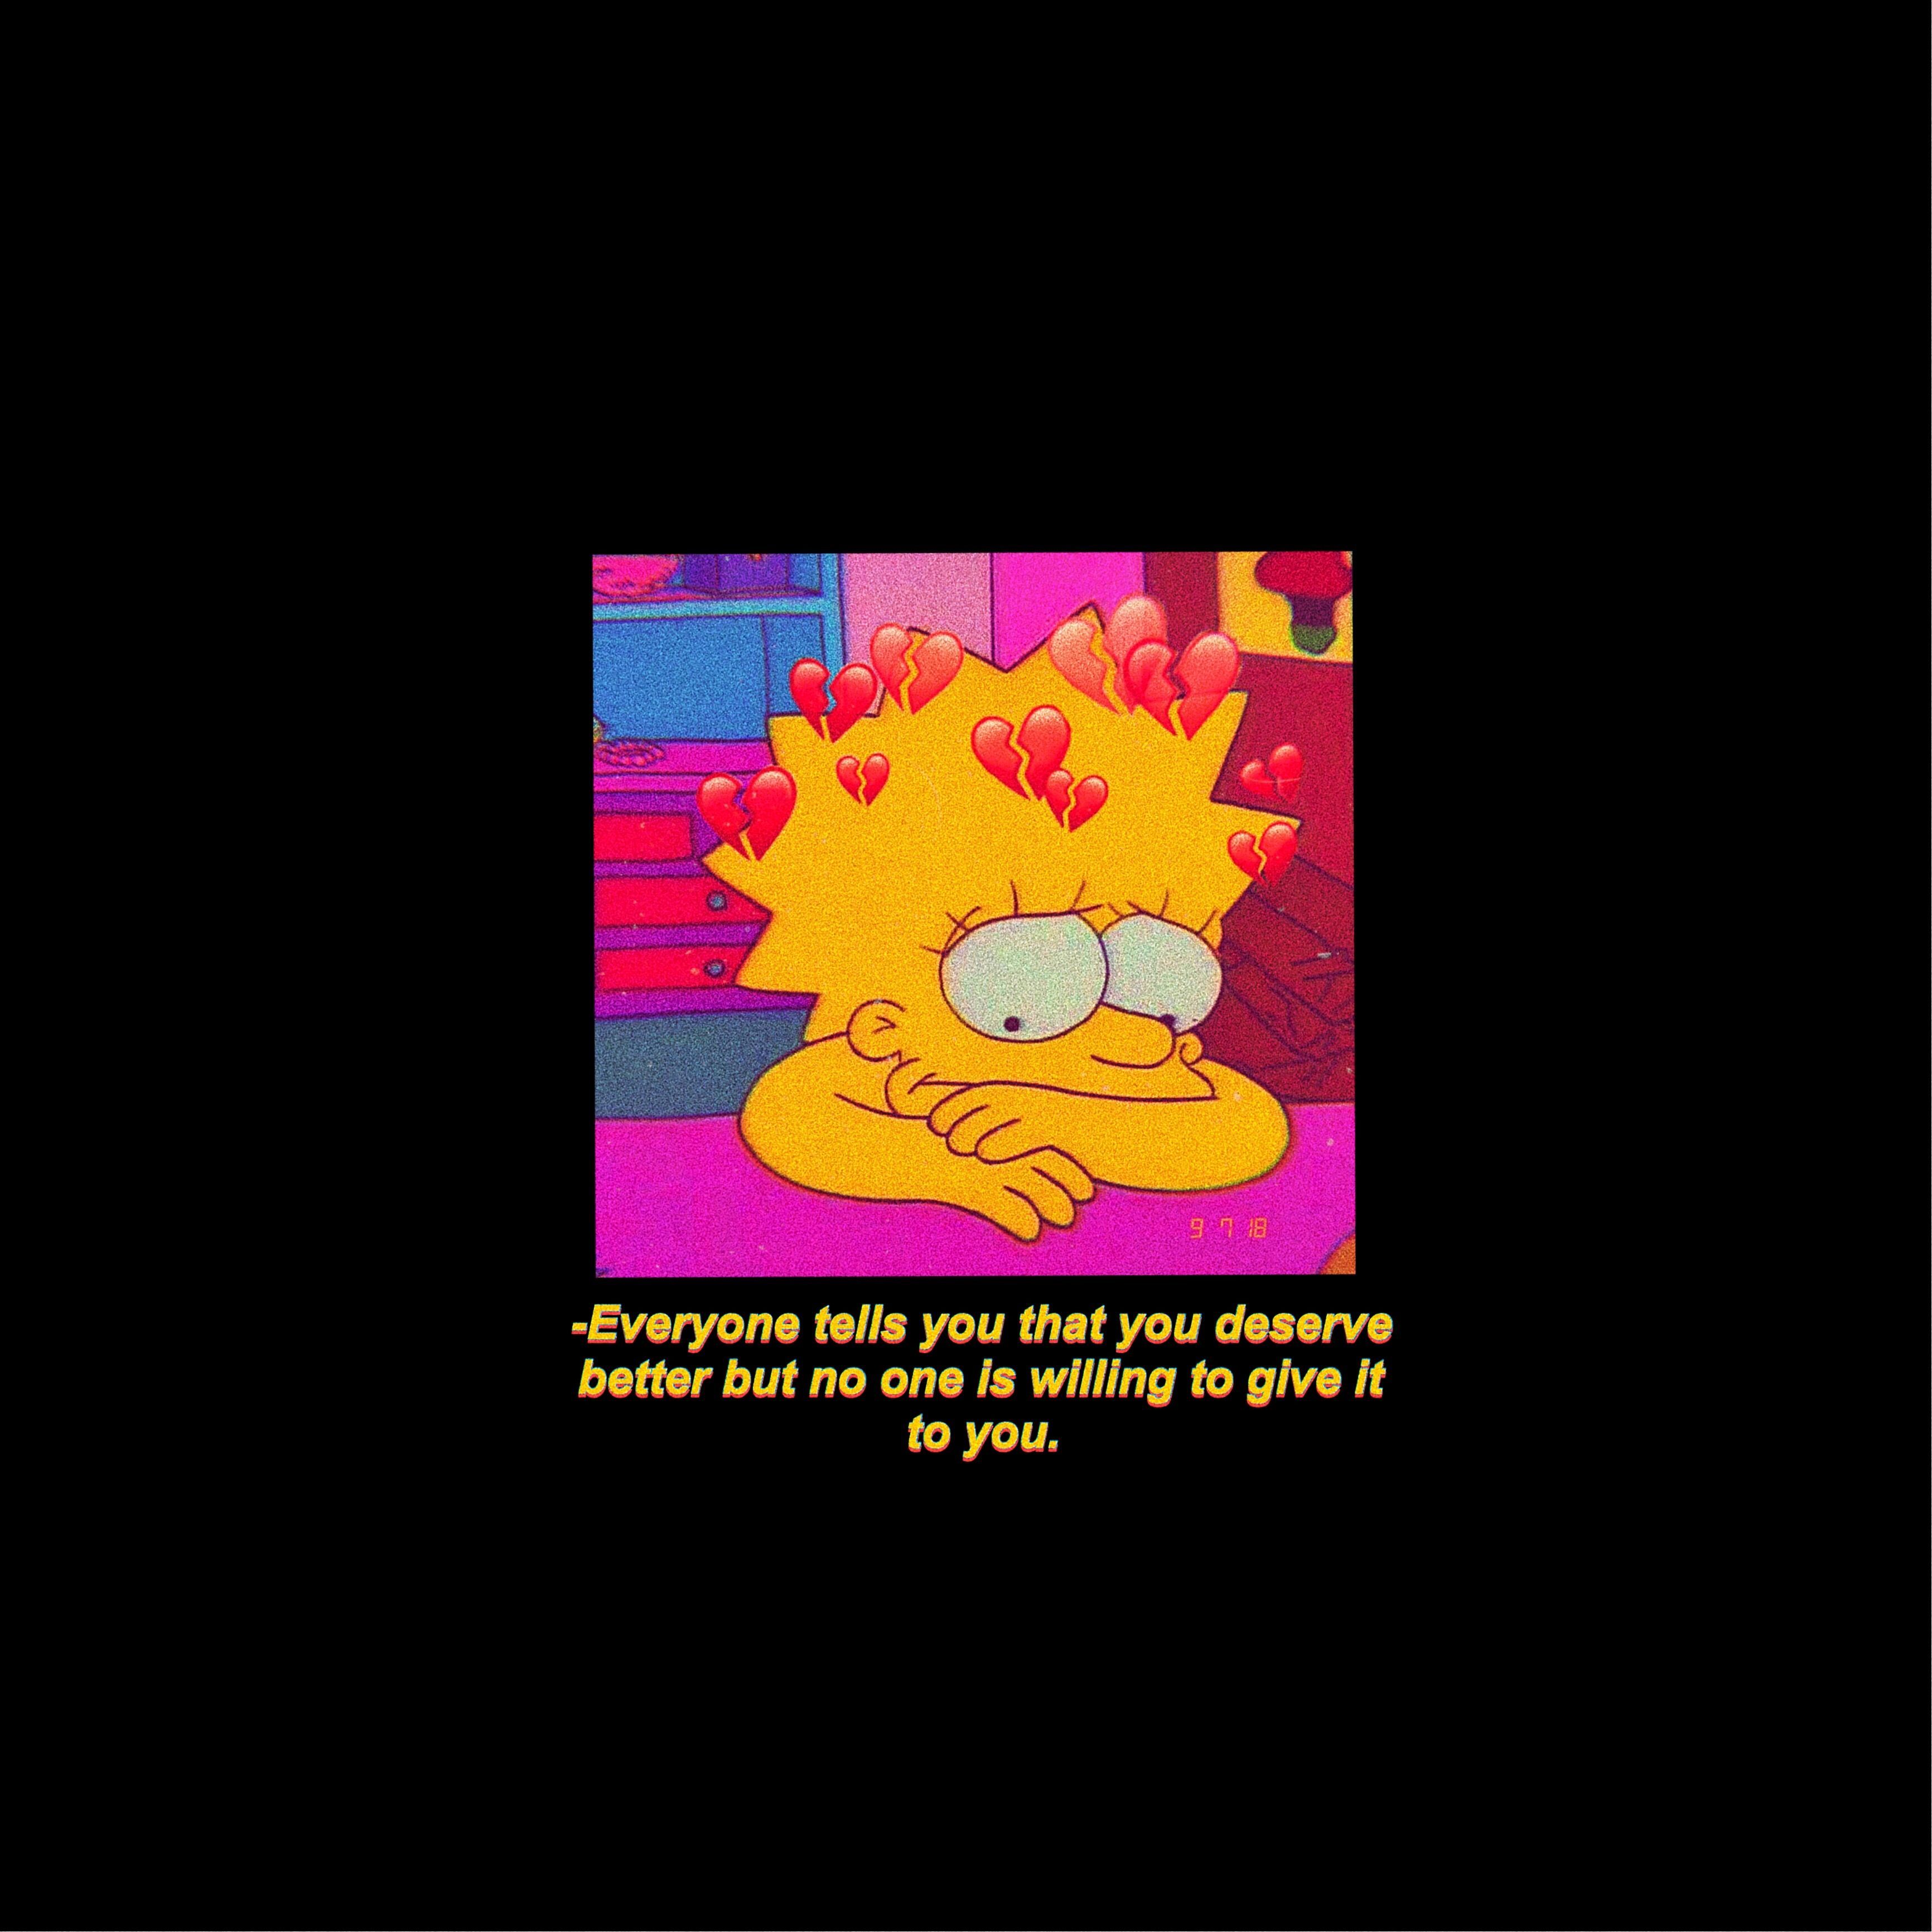 Aesthetic Sad Simpsons Wallpapers